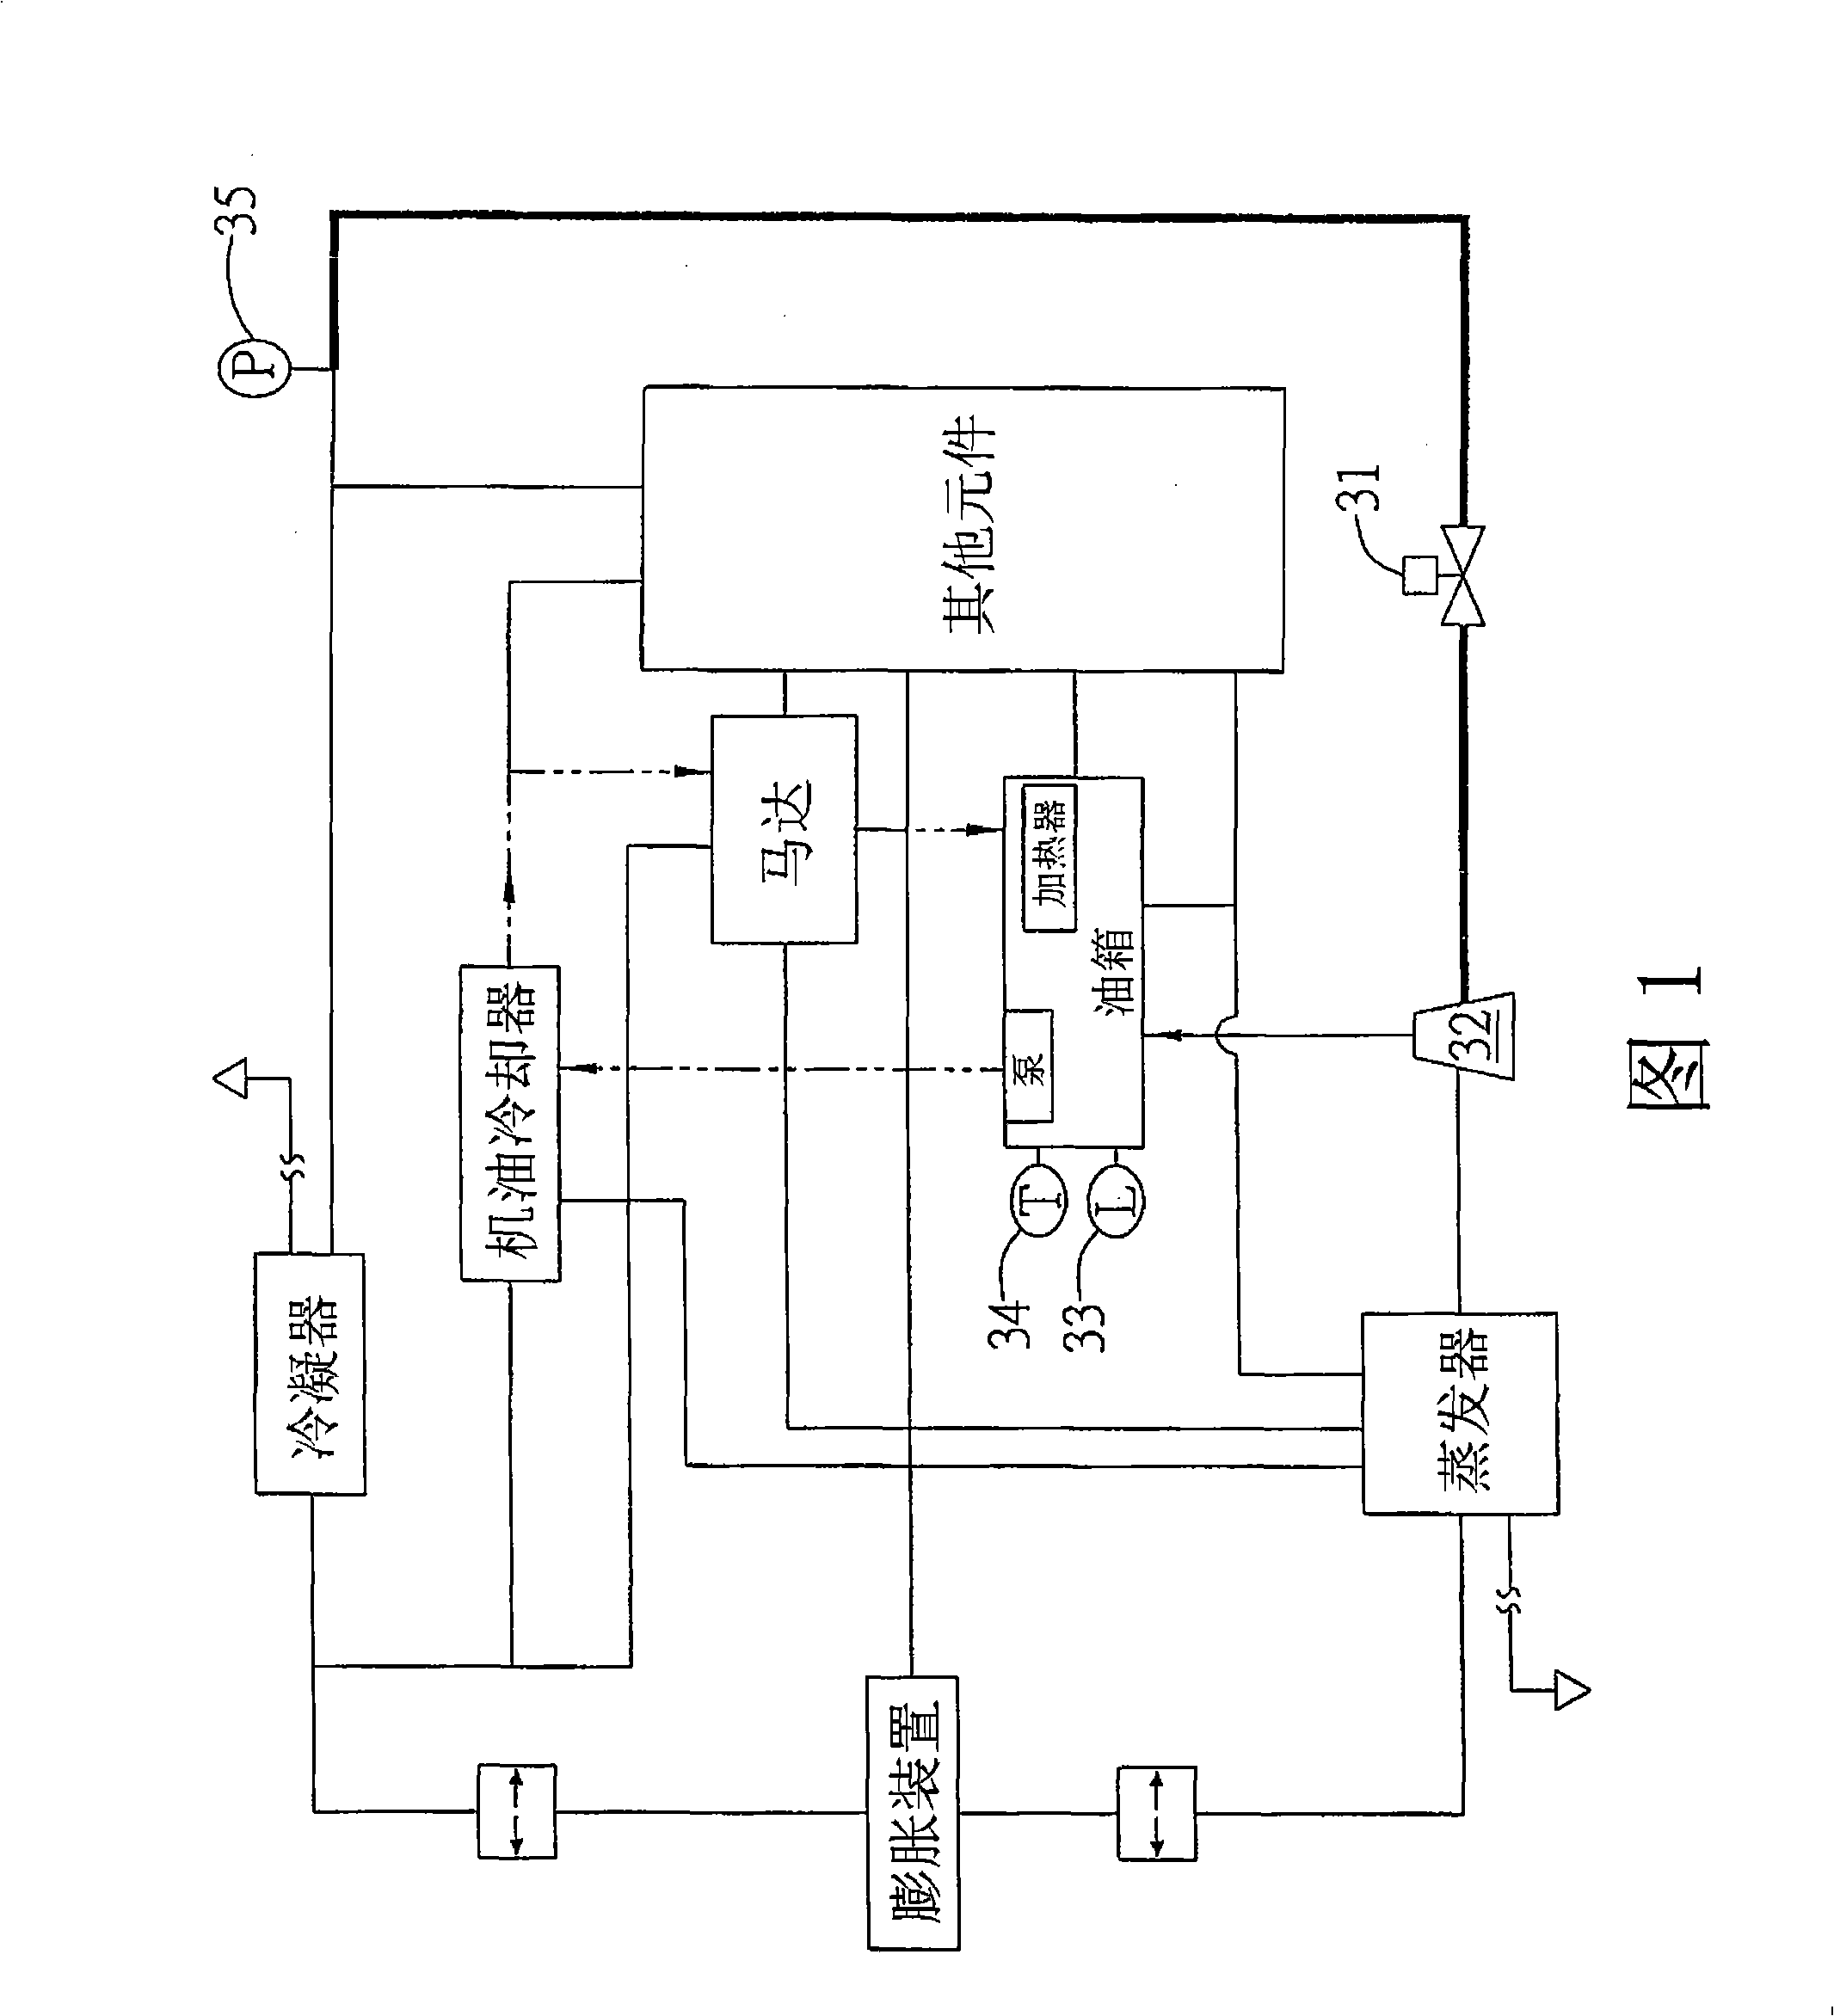 Oil return monitoring system of compressor and method thereof